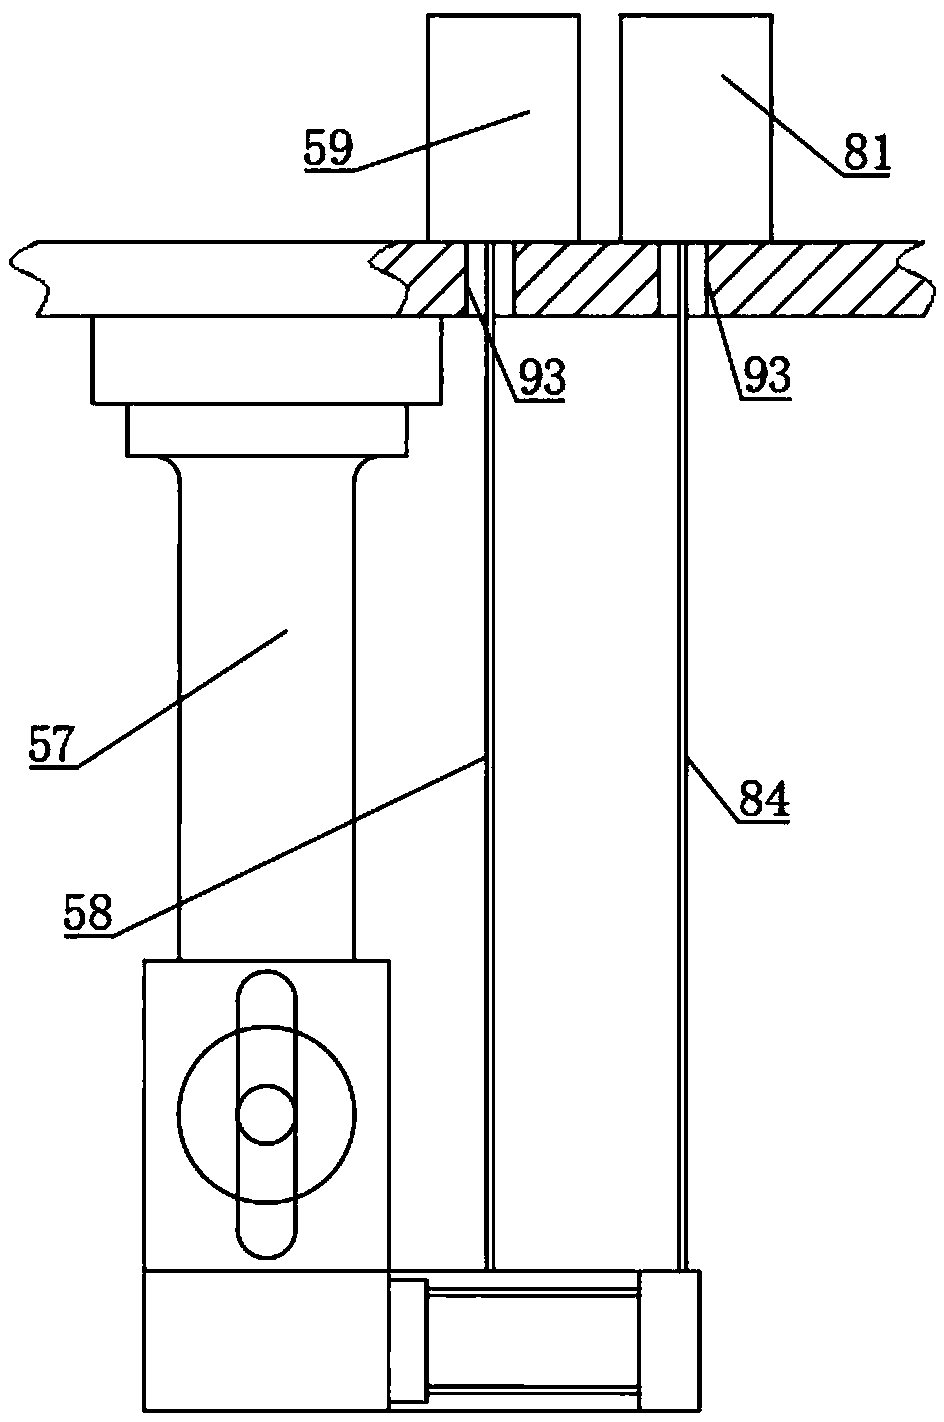 Efficient lock body and spring bolt assembling device